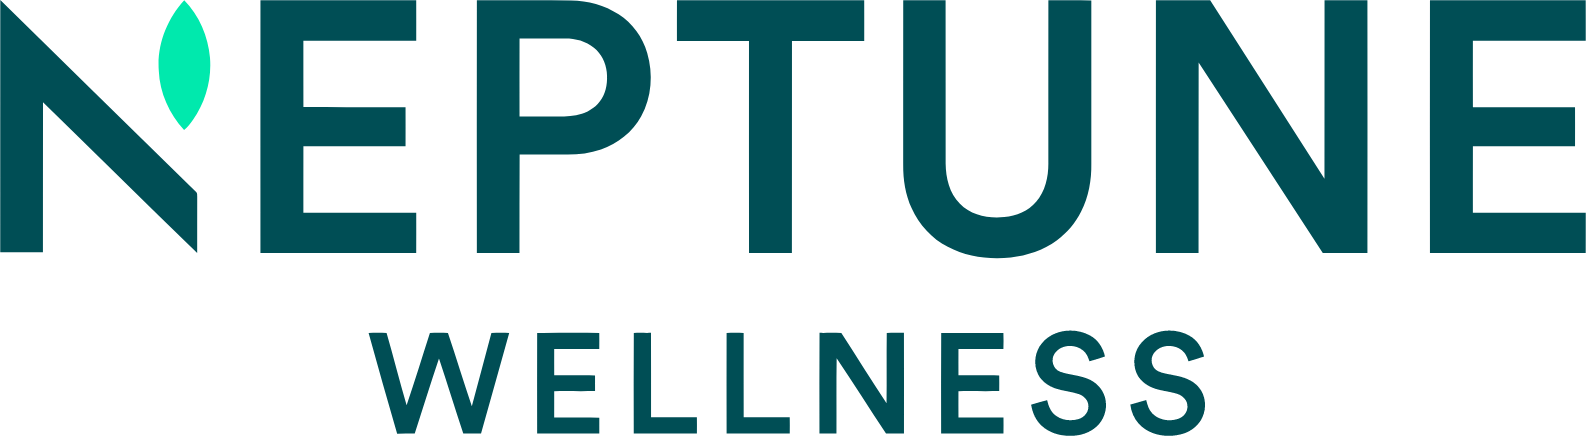 Neptune Wellness Solutions
 logo large (transparent PNG)